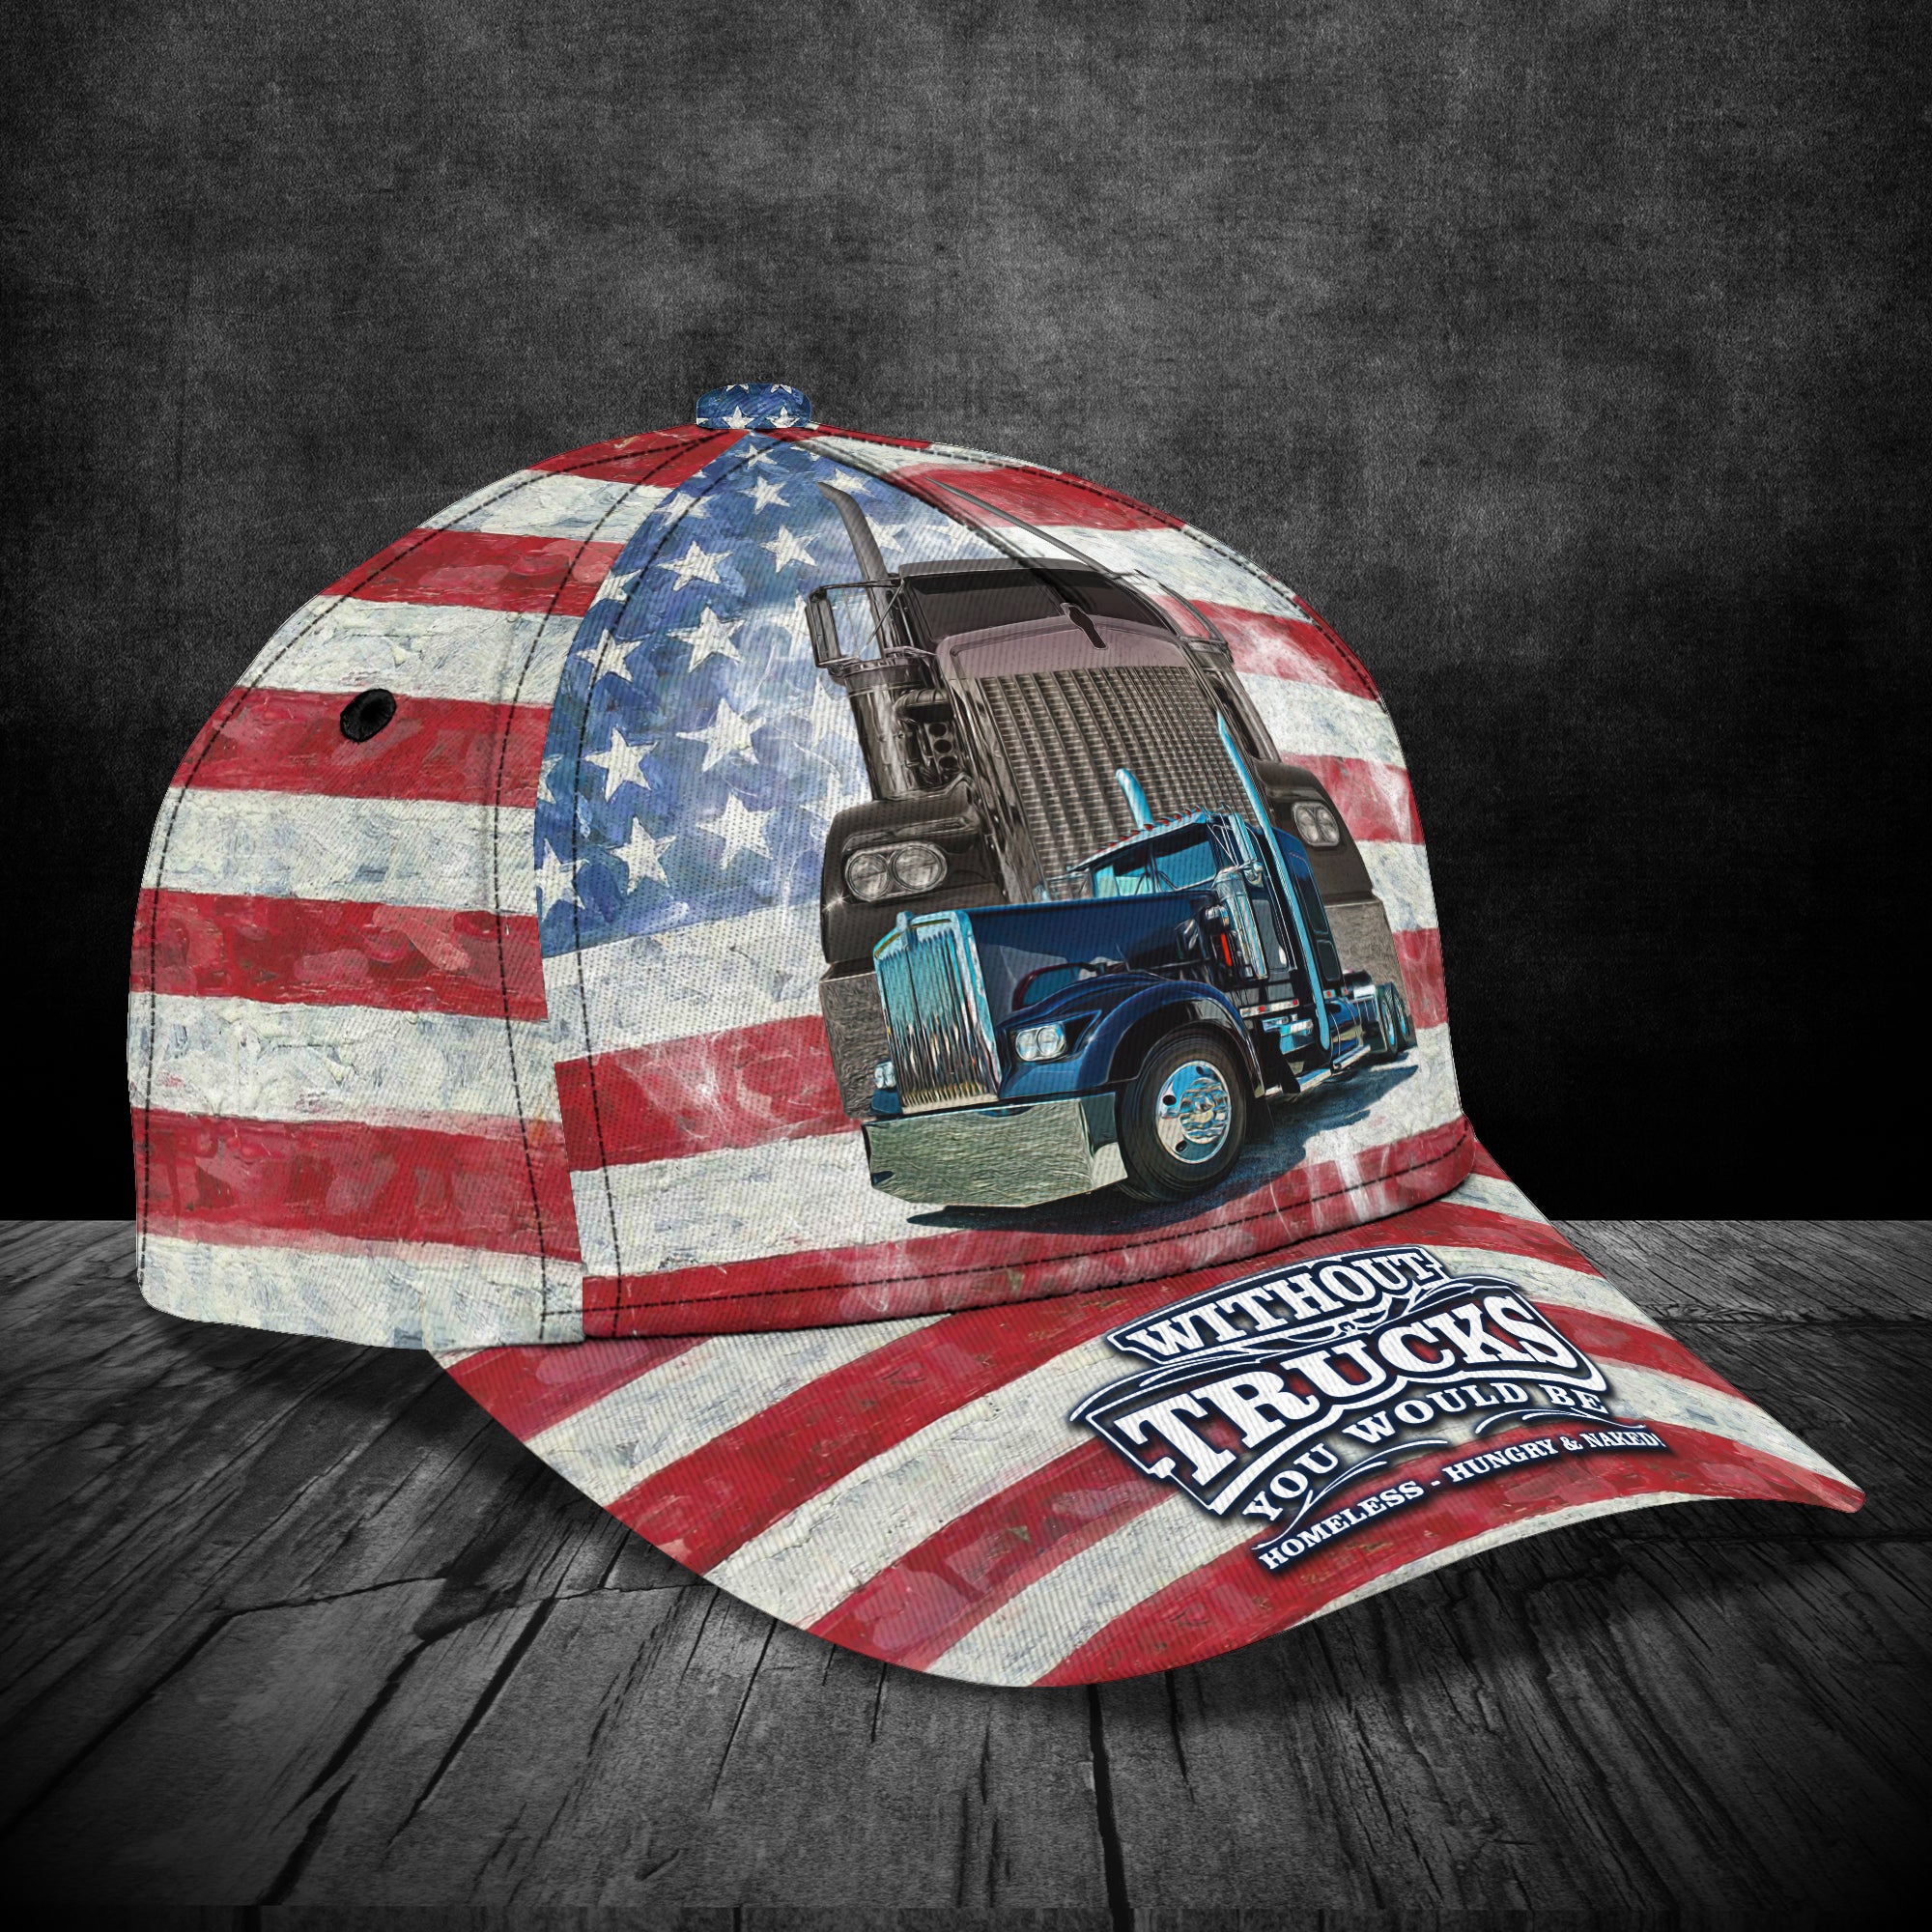 Trucker USA - Personalized Name Cap - Nsd99